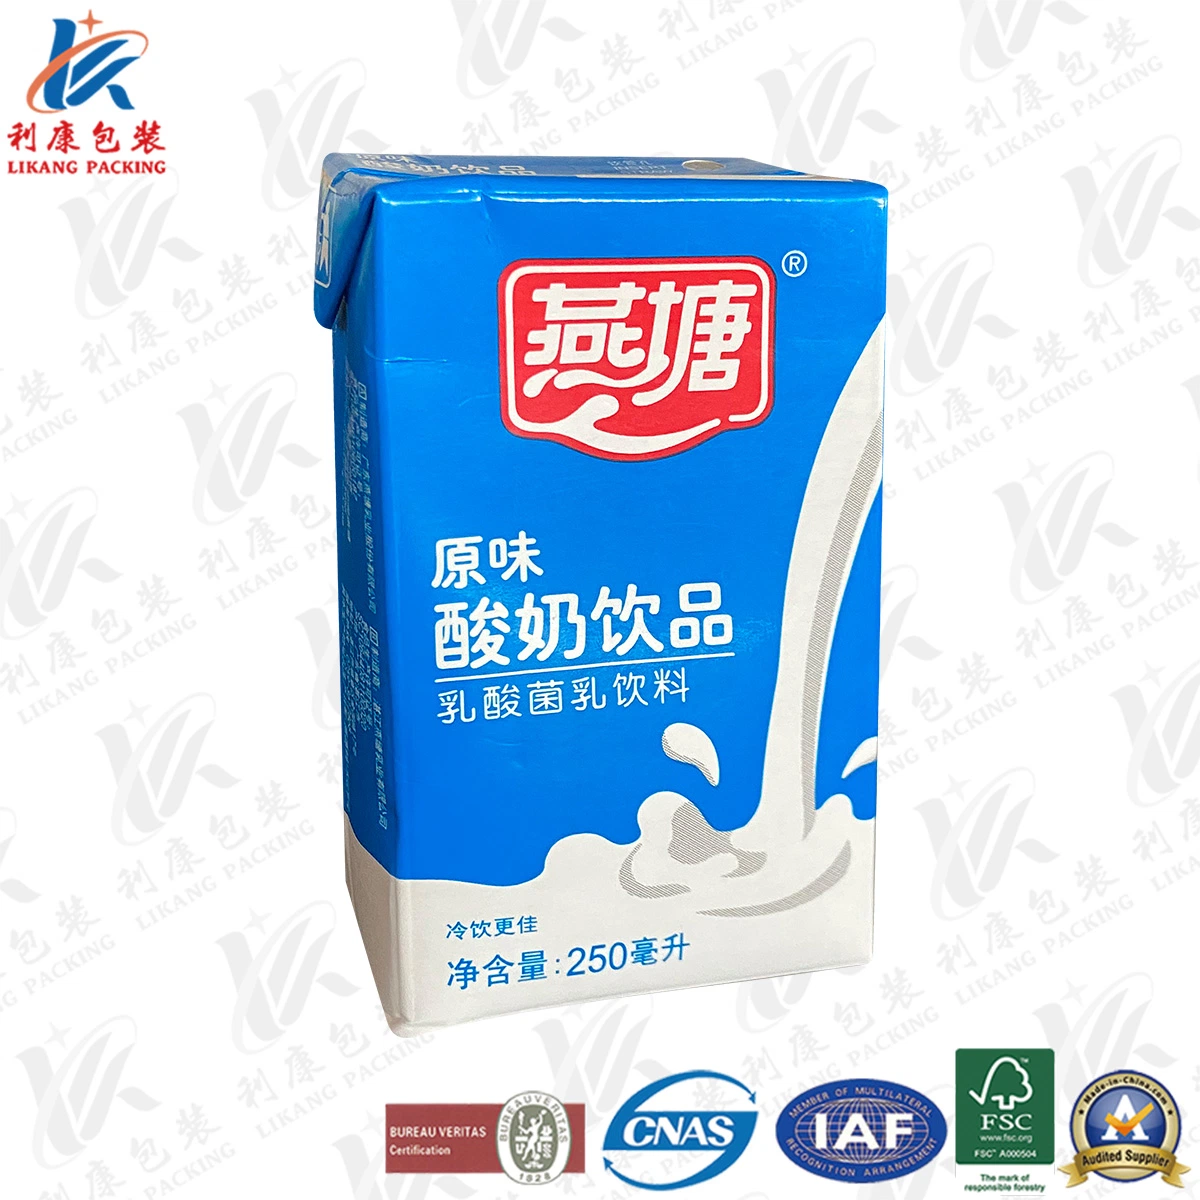 Ipi Aseptic Packaging Box; 200ml Aseptic Packaging Material for Juice; Aseptic Laminated Packaging Material for Uht Sterilization Milk; Aseptic Packaging Box